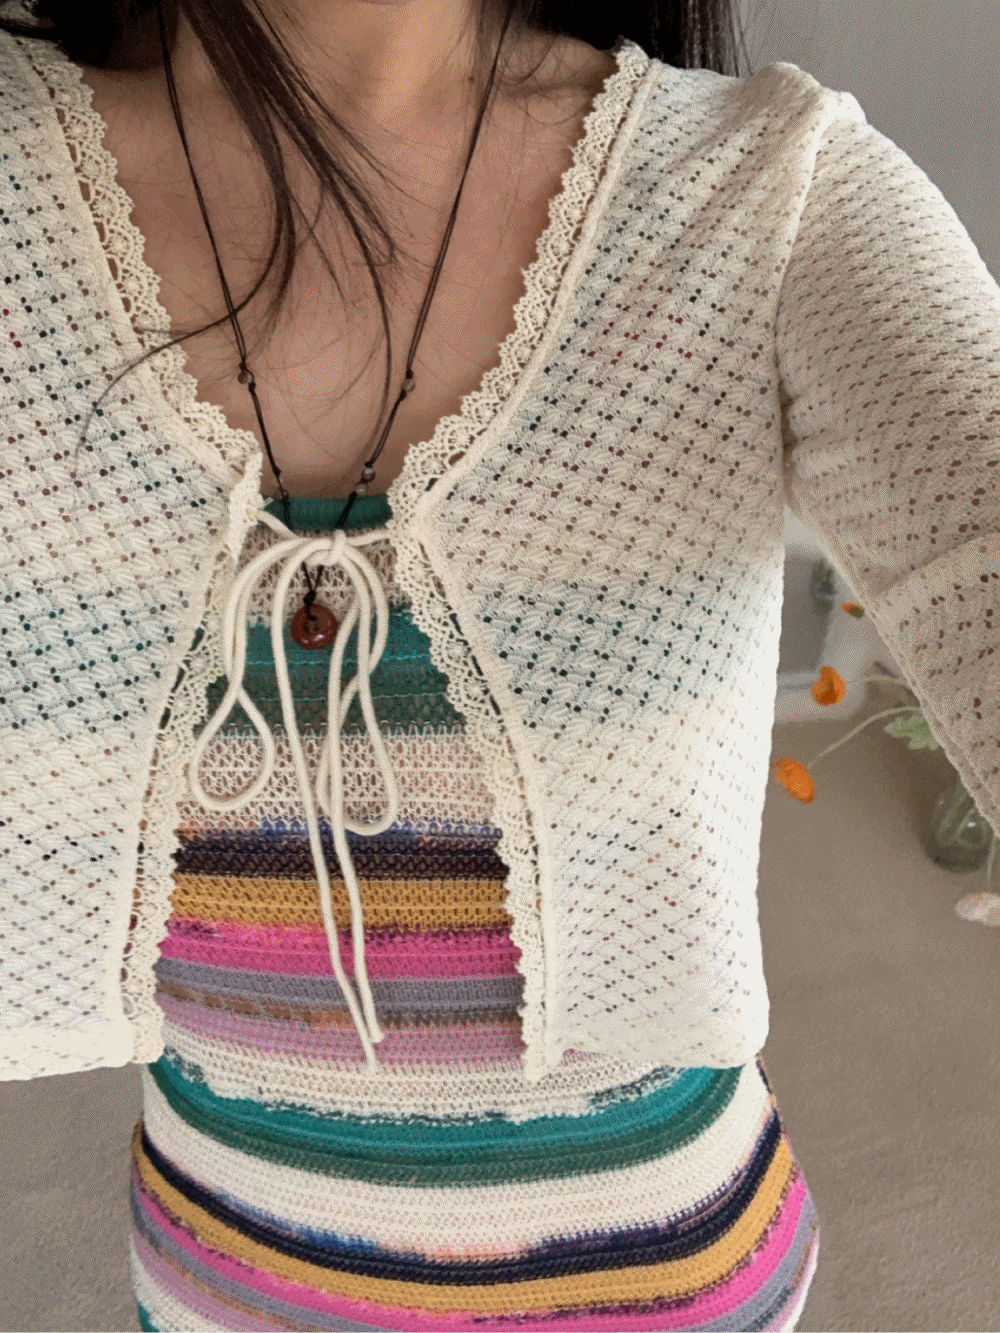 [Outer] Vanilla lace eyelet cardigan / 2 colors